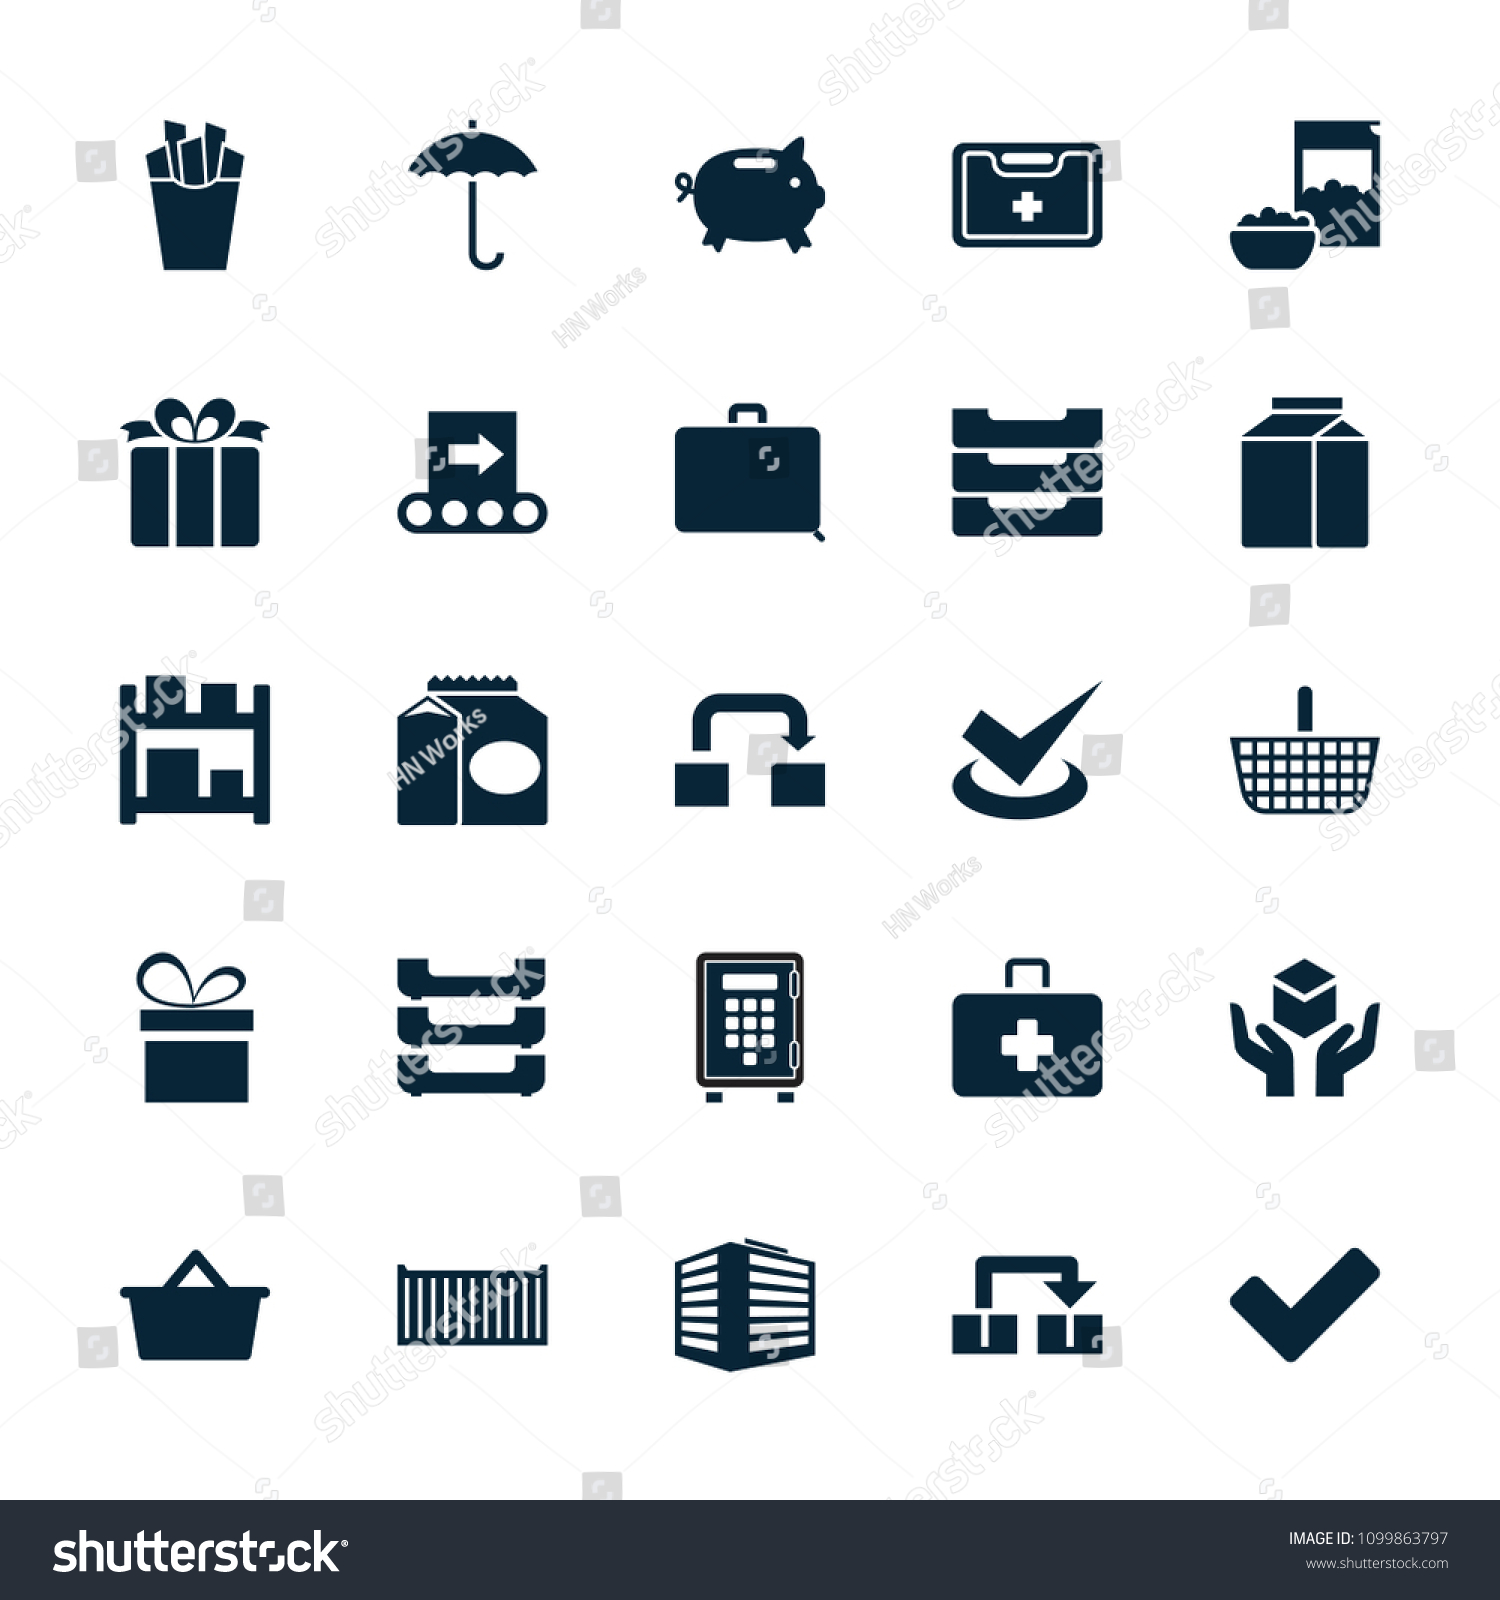 Box Icon Collection 25 Box Filled Stock Vector Royalty Free Shutterstock